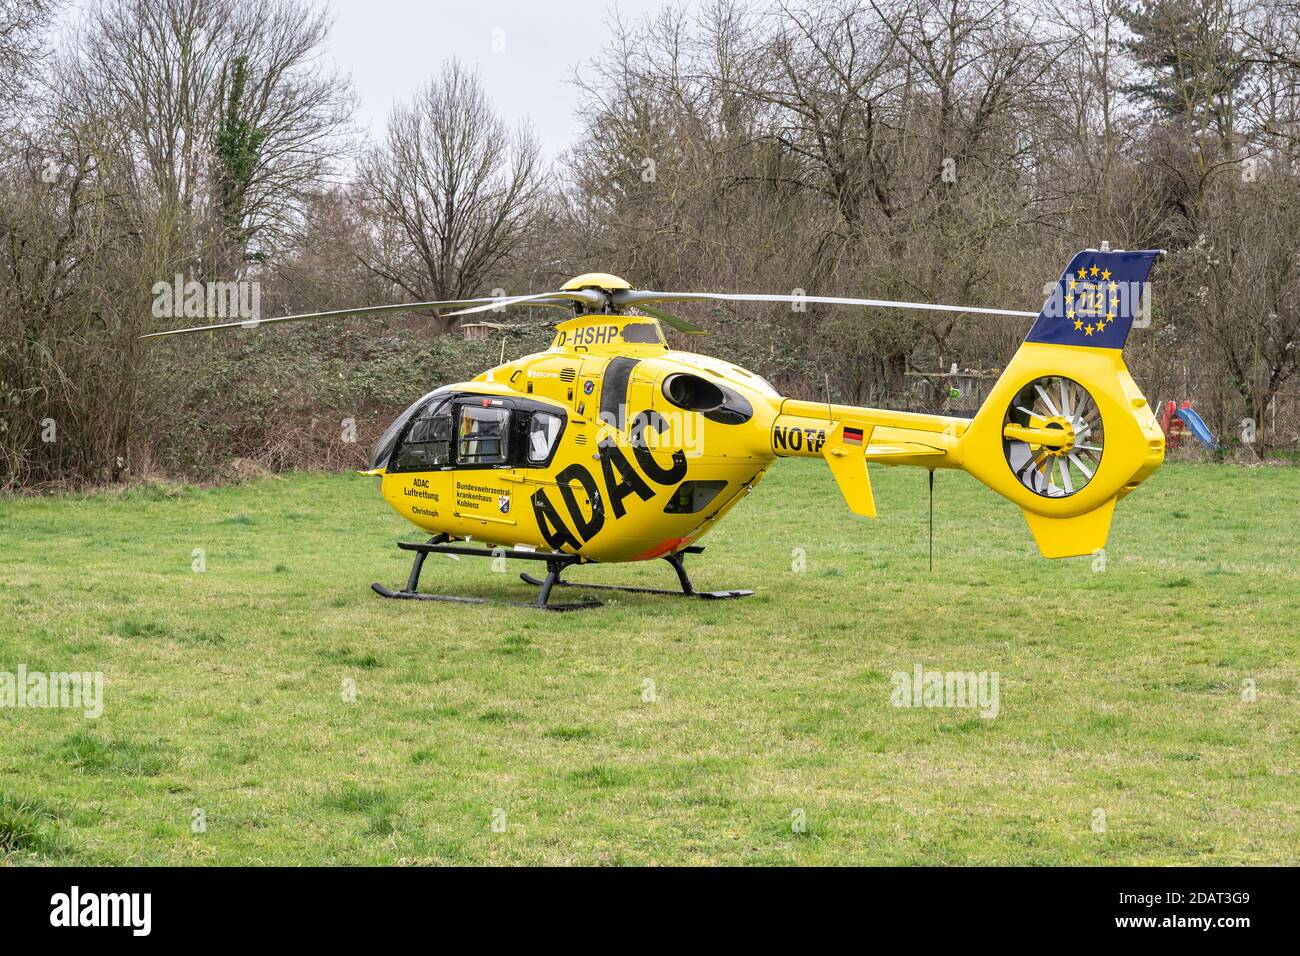 Koblenz Germany 01.03.2020 Waiting ADAC rescue ambulance helicopter name Christoph D-HSHP on green gras Airbus factory Rhineland-Palatinate Stock Photo